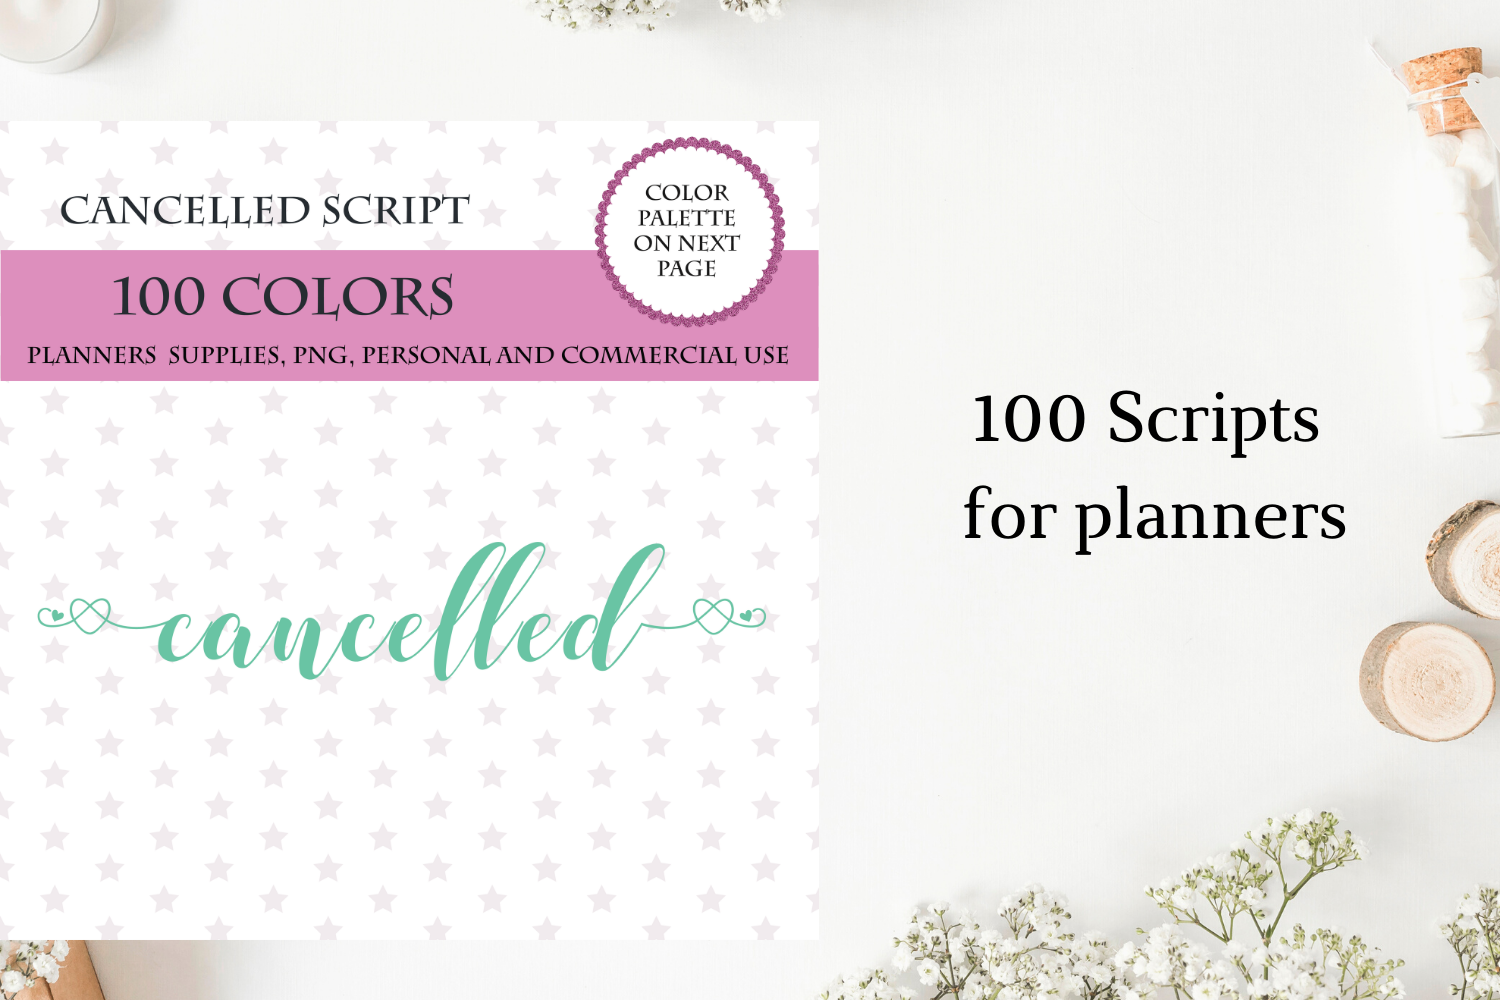 100 Cancelled Font Clipart Cancelled Sticker Clipart Cancelled Planner Cancelled Script By Old Continent Design Thehungryjpeg Com